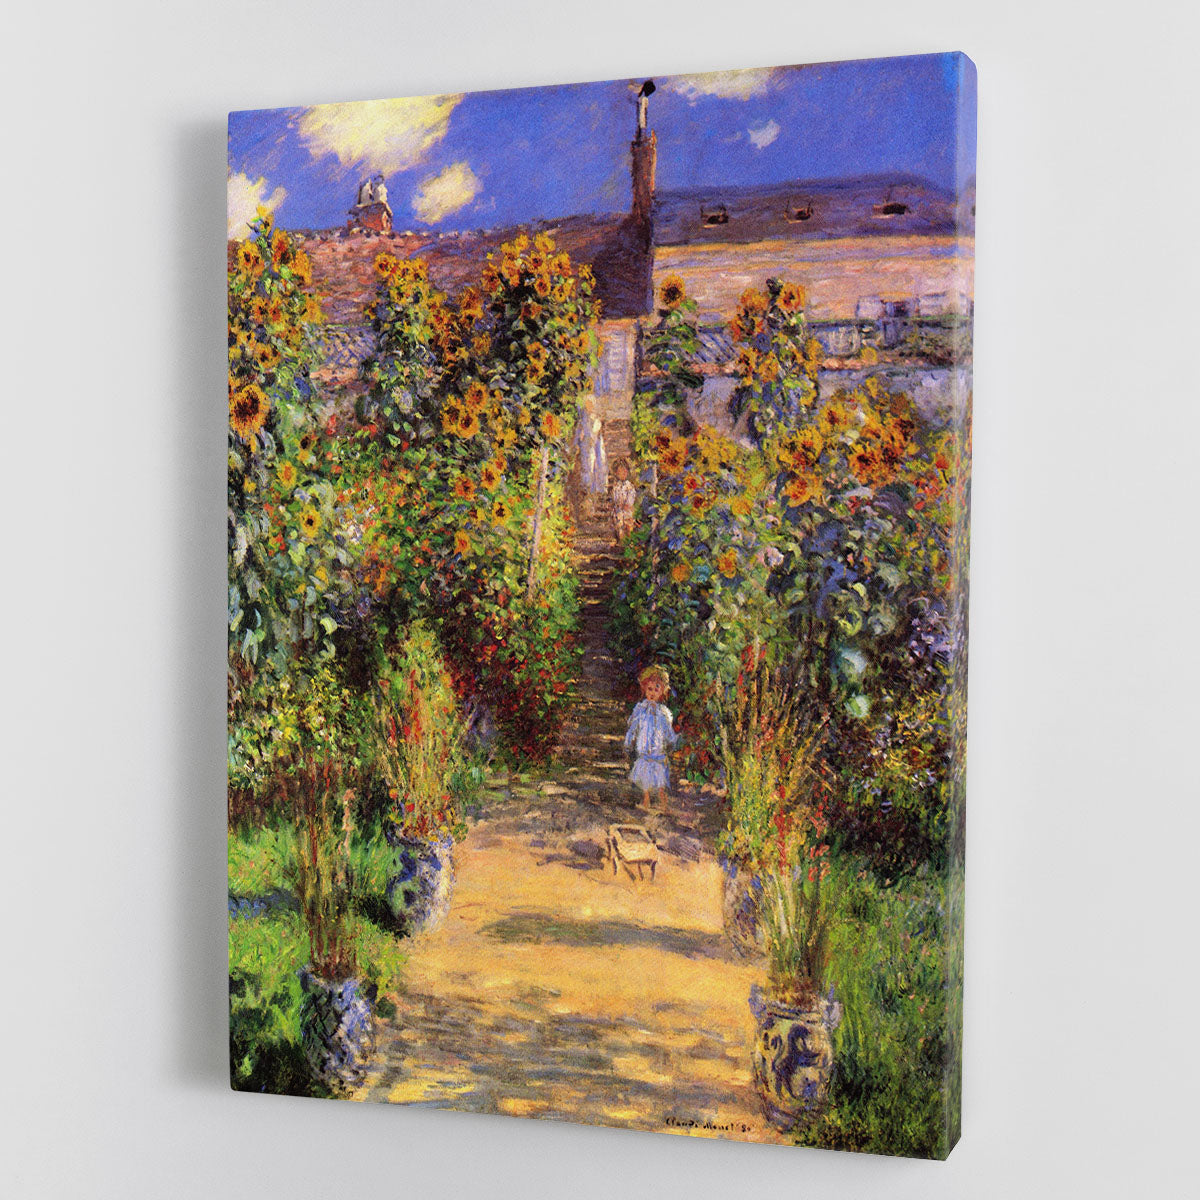 Seine bank at Vetheuil by Monet Canvas Print or Poster - Canvas Art Rocks - 1